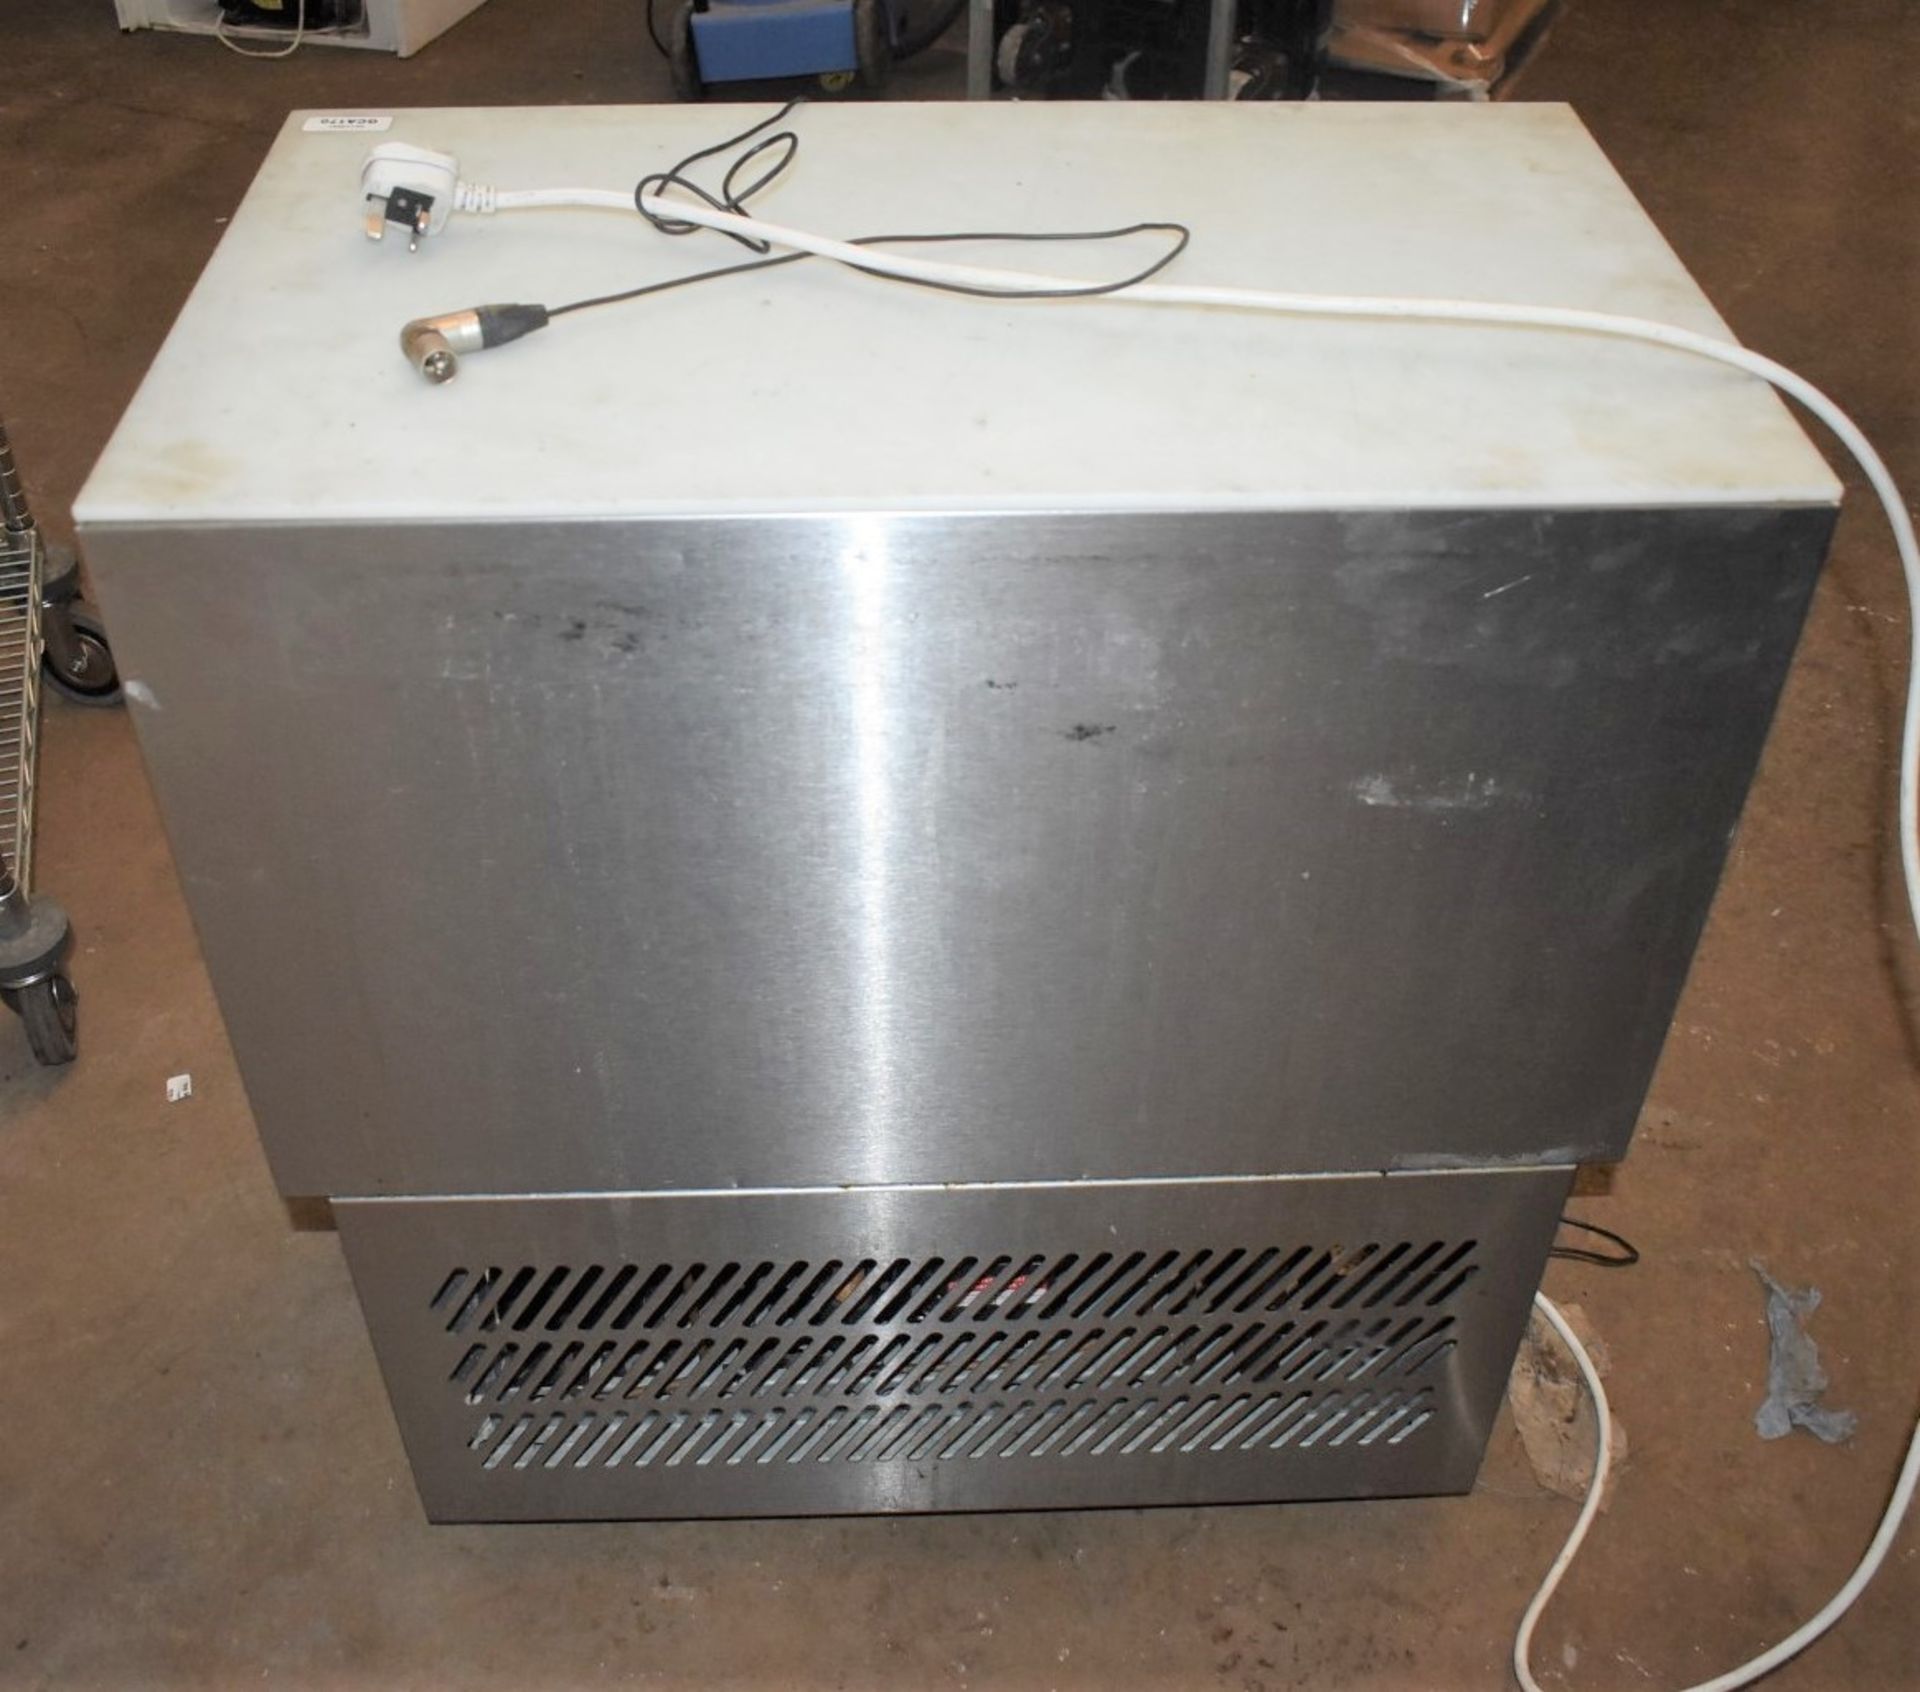 1 x Williams PW4 Refrigerated Prep Well With Prop Top Lid - CL011 - Ref CGA170 WH5 - 240v - - Image 8 of 9